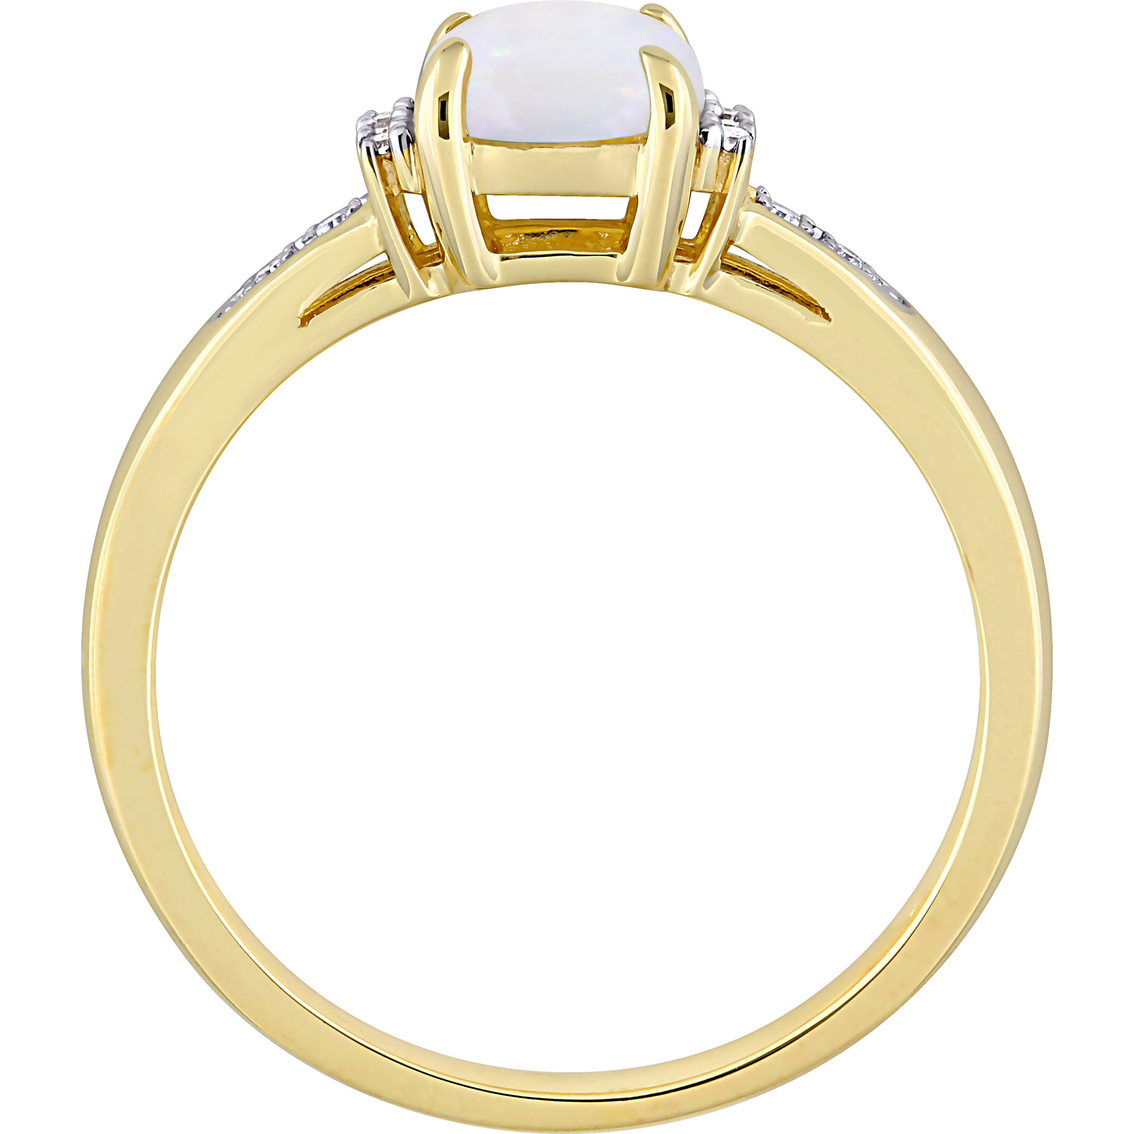 Sofia B. 10K Yellow Gold 1/2 CTW Opal and Diamond Accent Ring - Image 2 of 4